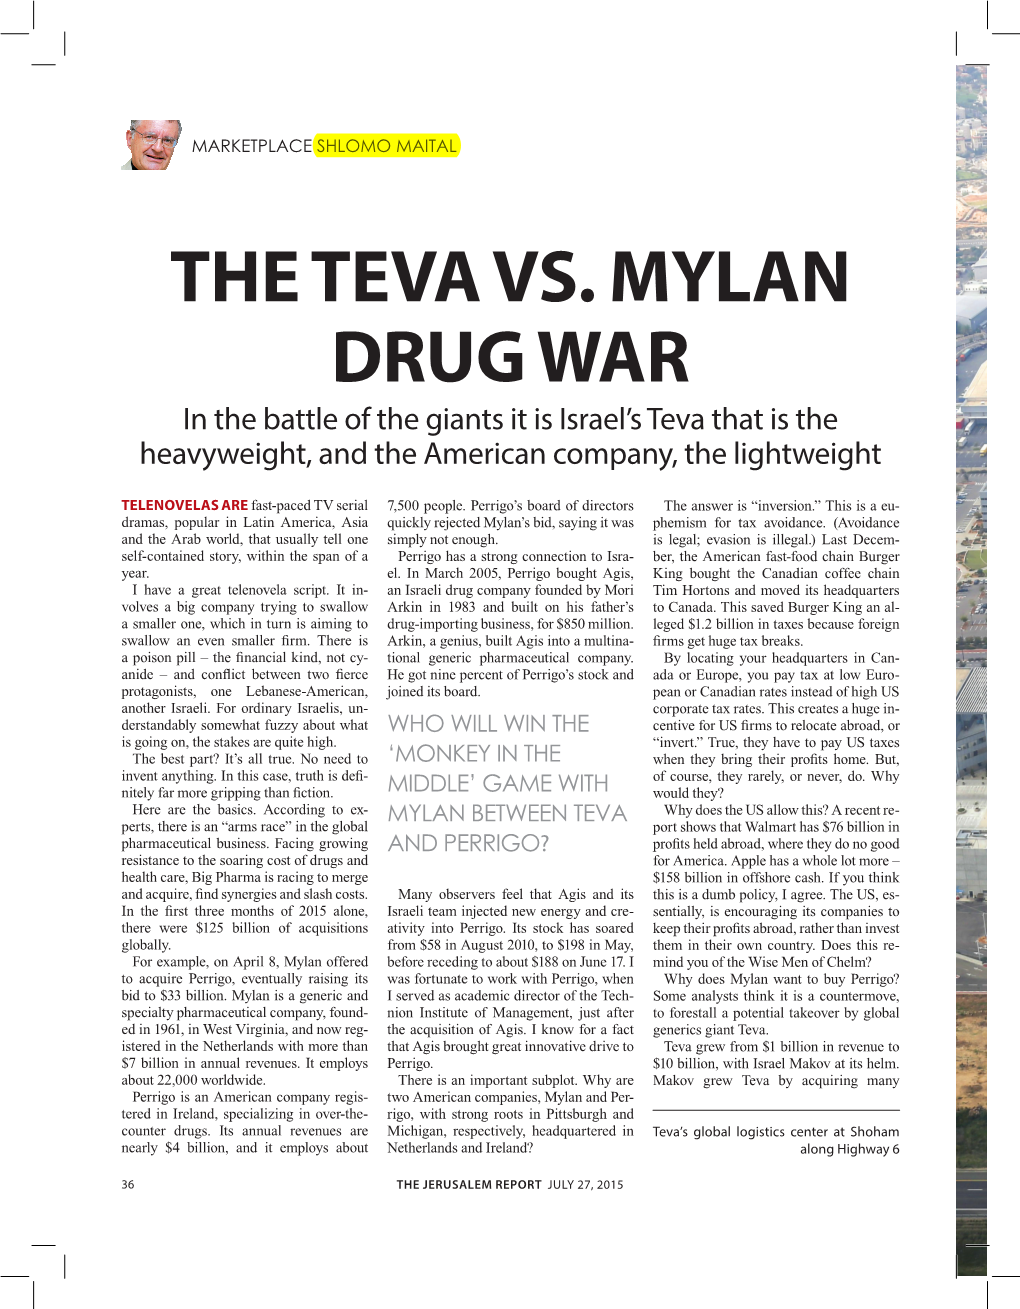 THE TEVA VS. MYLAN DRUG WAR in the Battle of the Giants It Is Israel’S Teva That Is the Heavyweight, and the American Company, the Lightweight